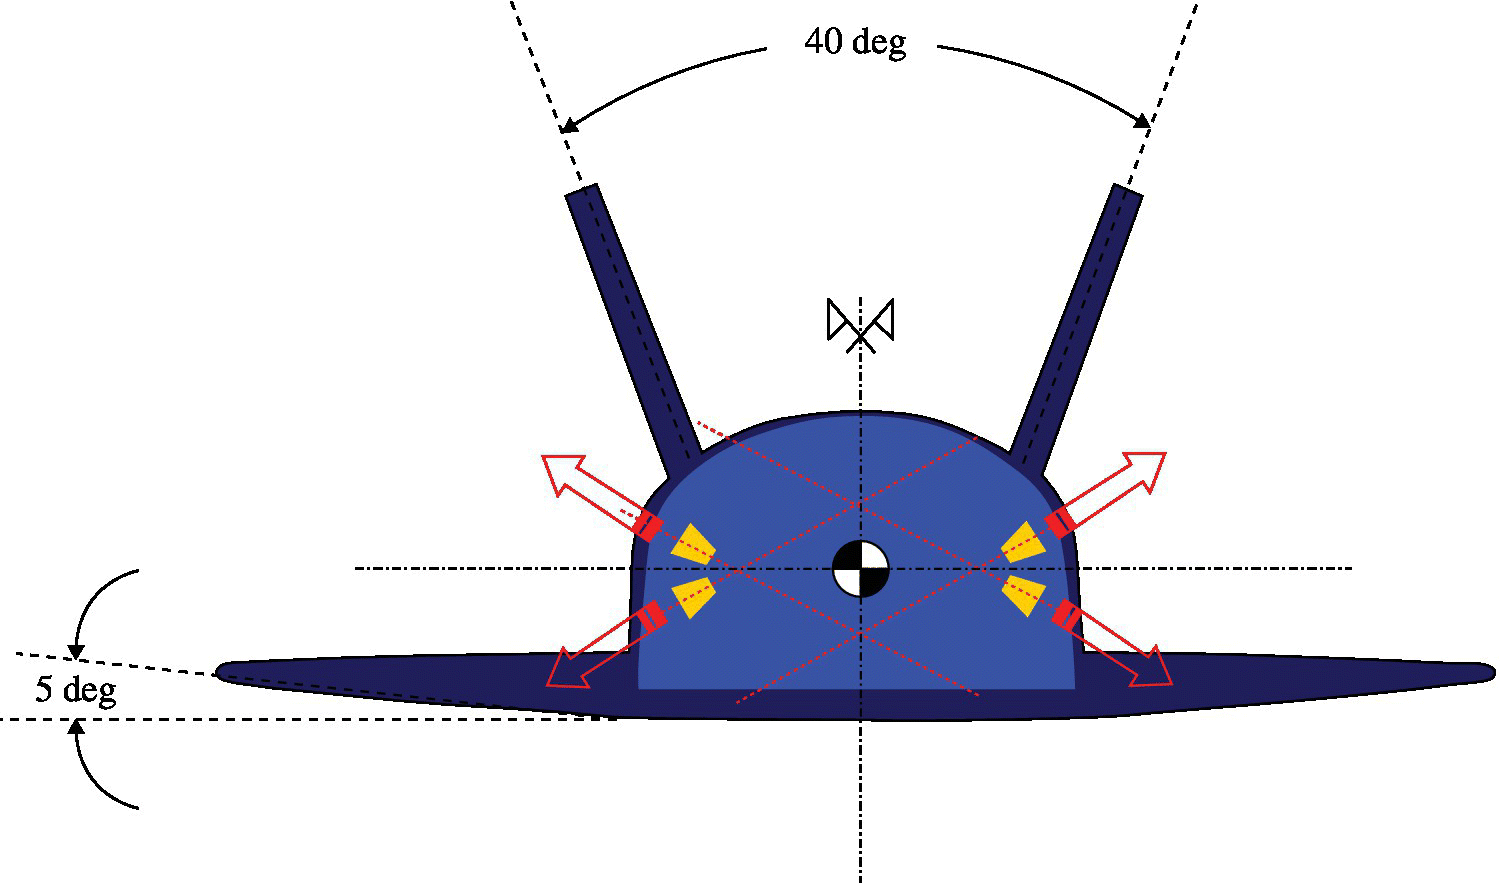 Schematic illustrating ORV‐WSB dihedral angles (dashed lines) with RCS pods on base, with 4 arrows indicating the thrust being provided by each pod.